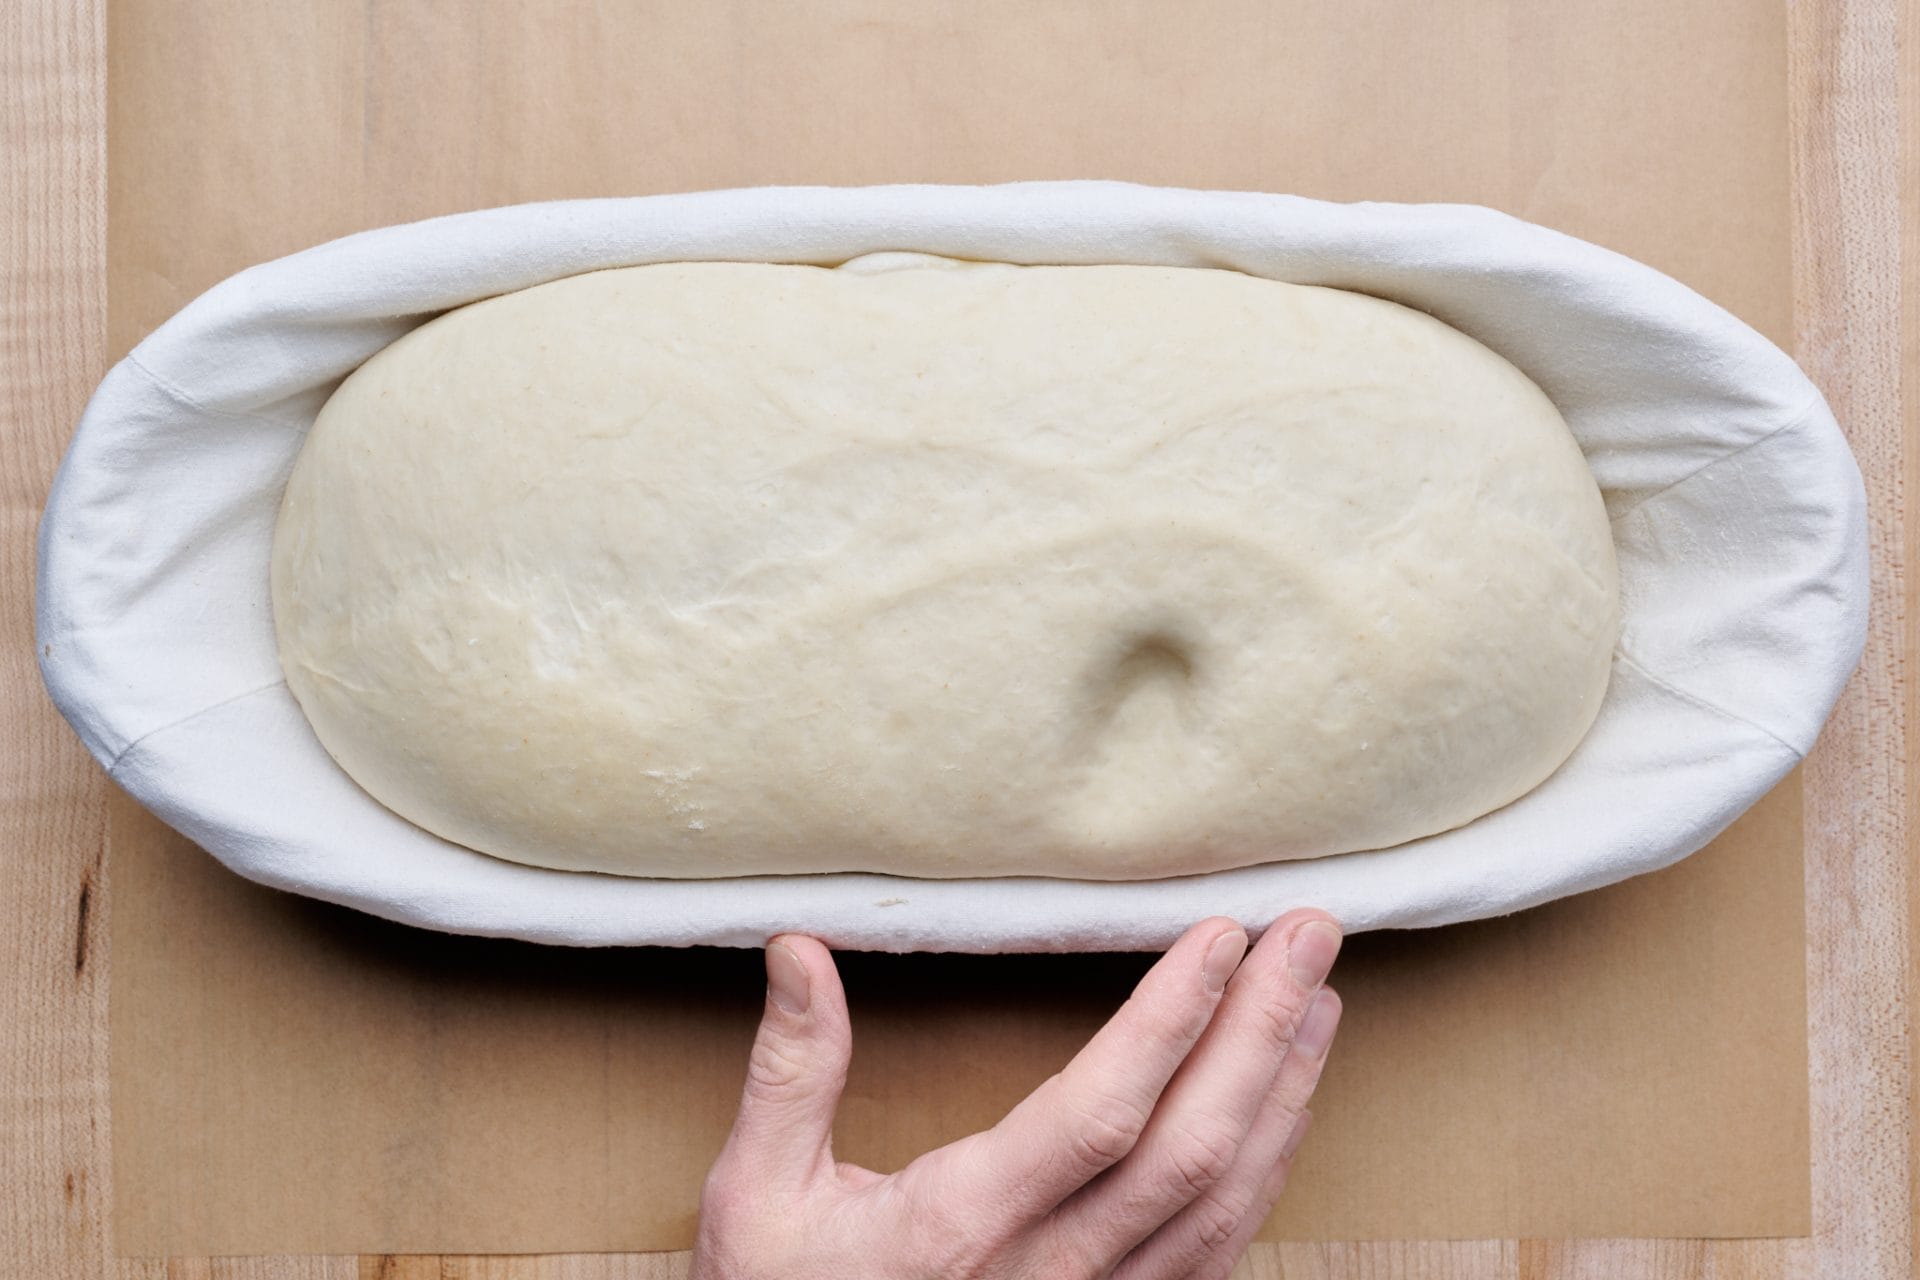 Overproofed dough and the poke test